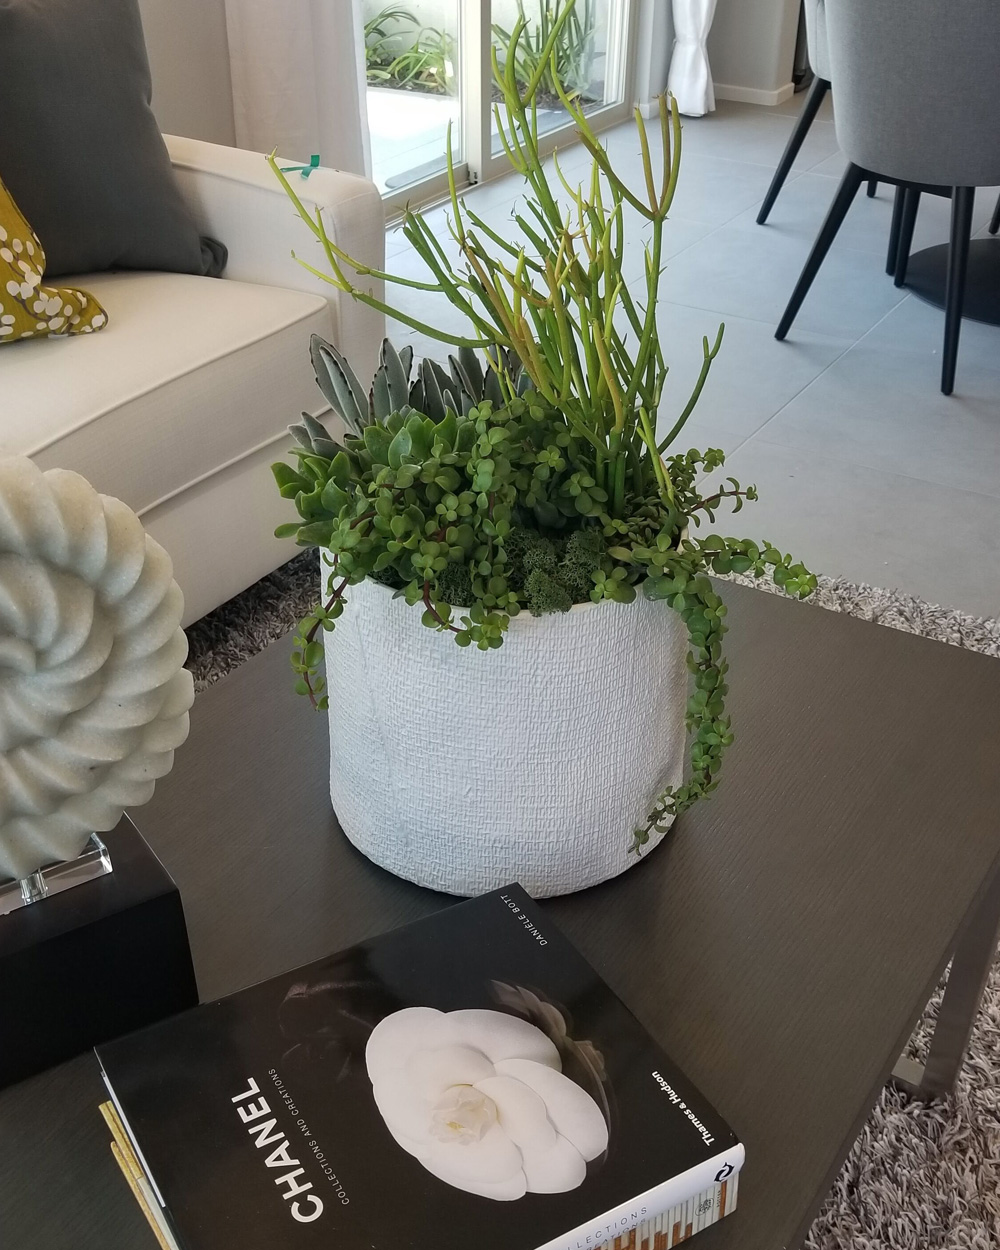 Coffee table book with plant